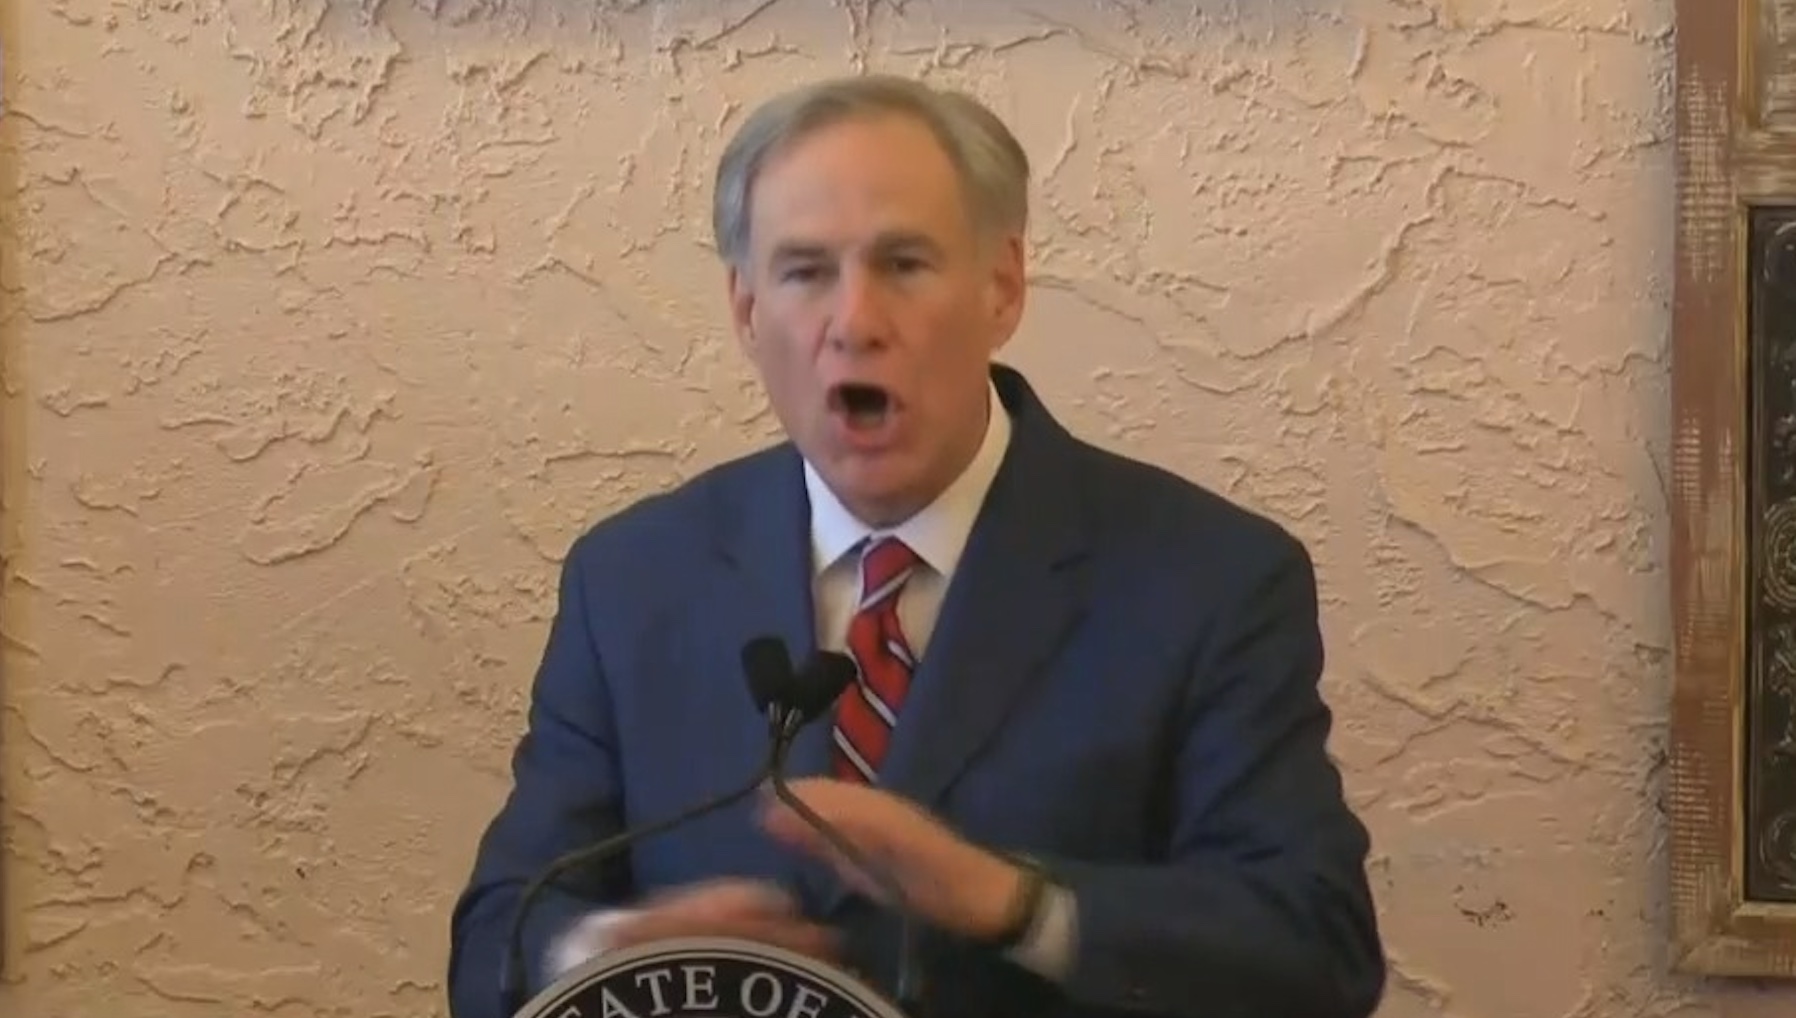 Mothers Against Greg Abbott Declare They Are Ready To Fight To Make Texas Safe Again